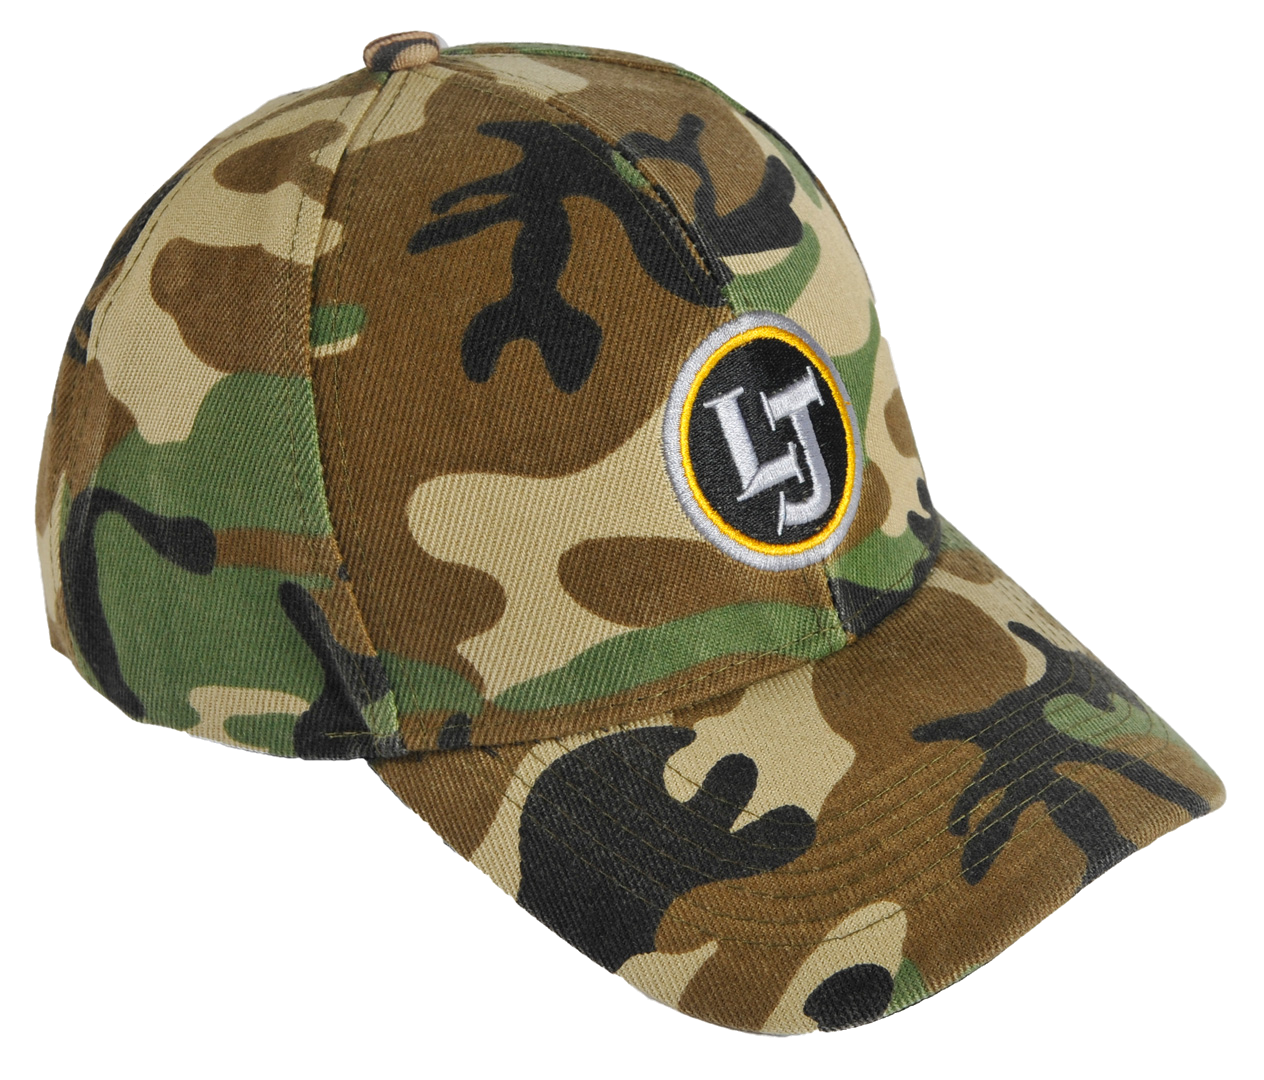 camo_hat close cropped.png